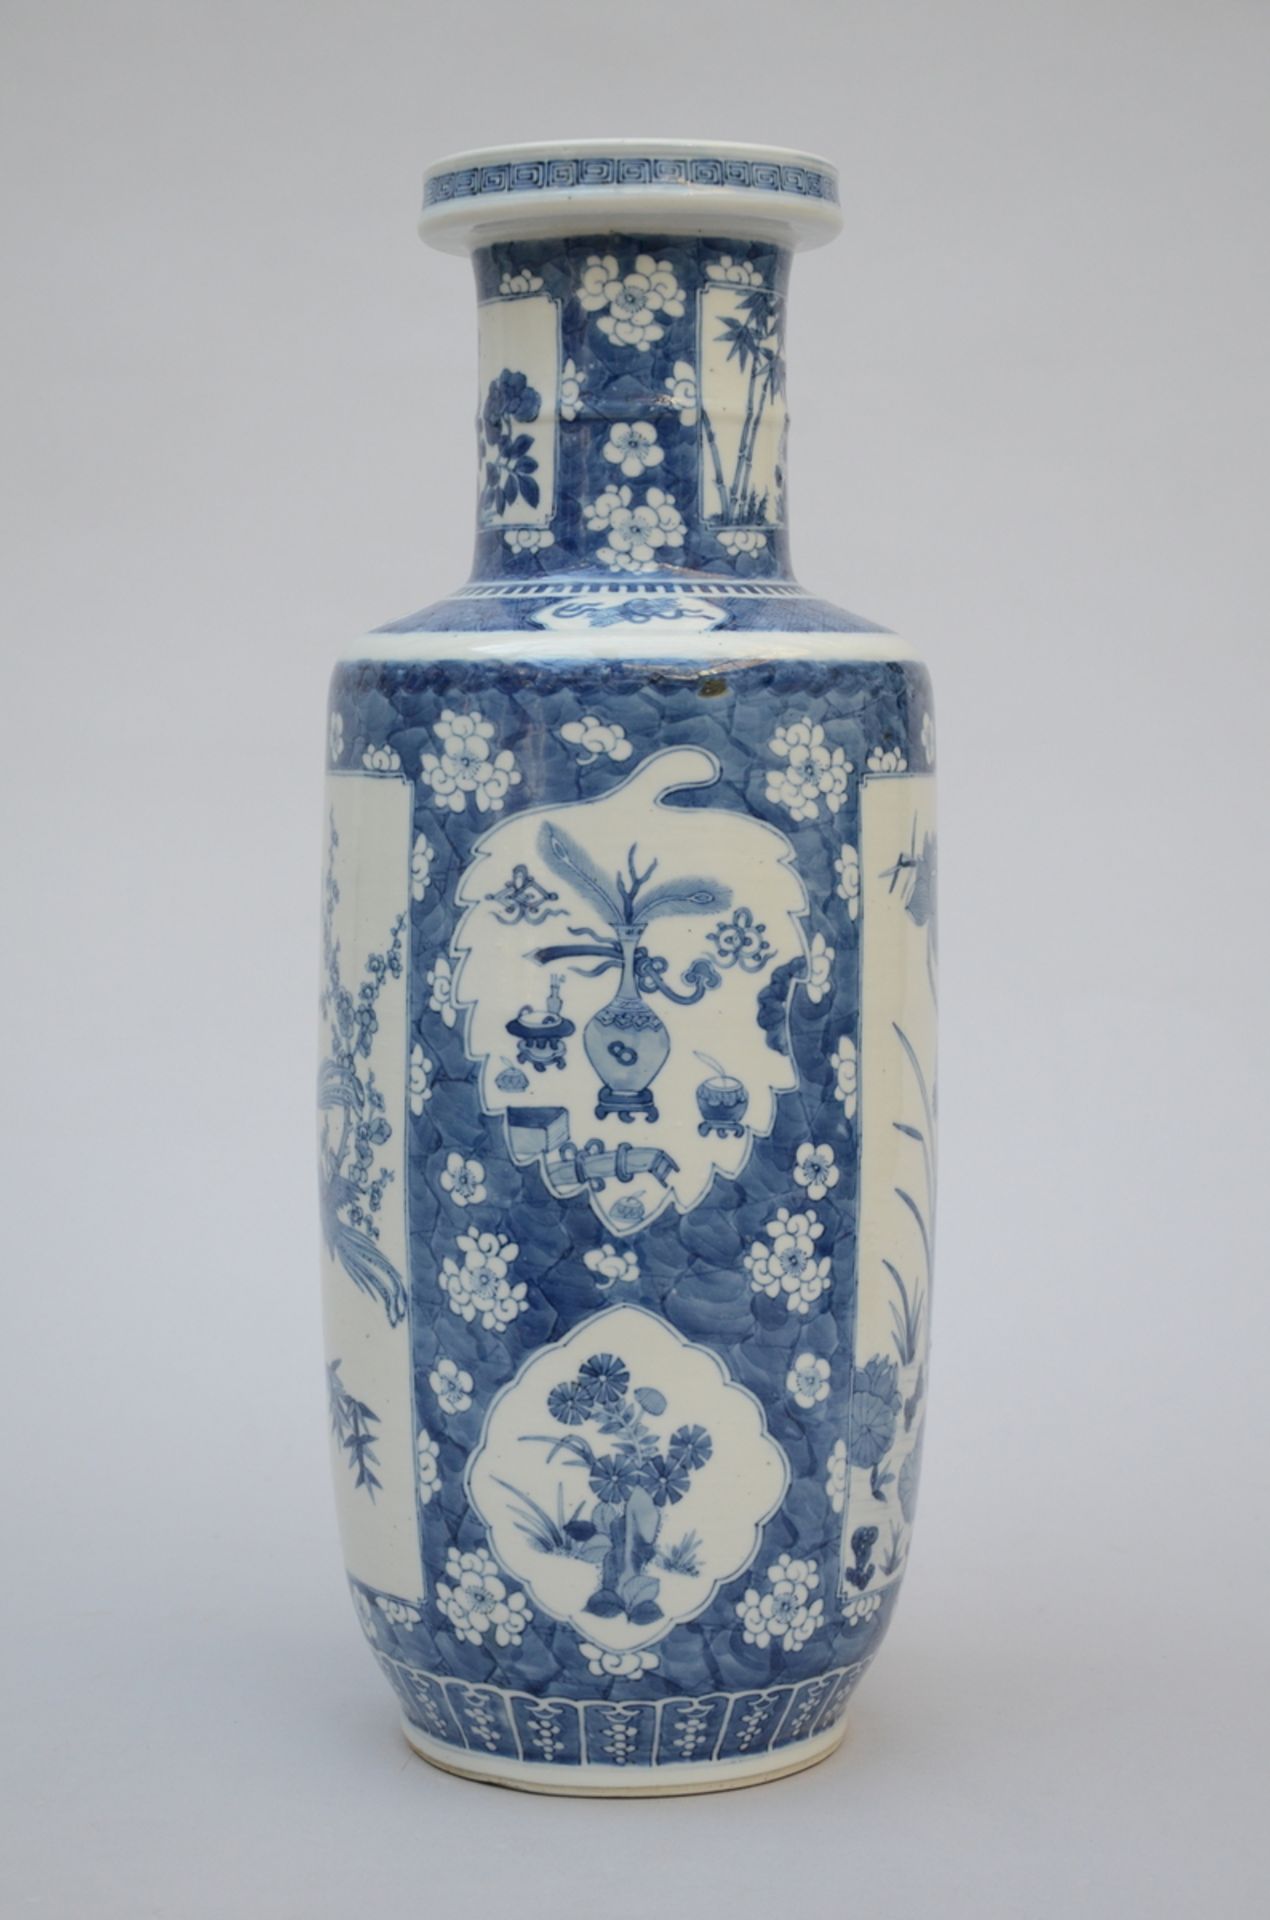 Chinese rouleau vase in blue and white porcelain 'flowers', 19th century (h47cm) - Image 3 of 5